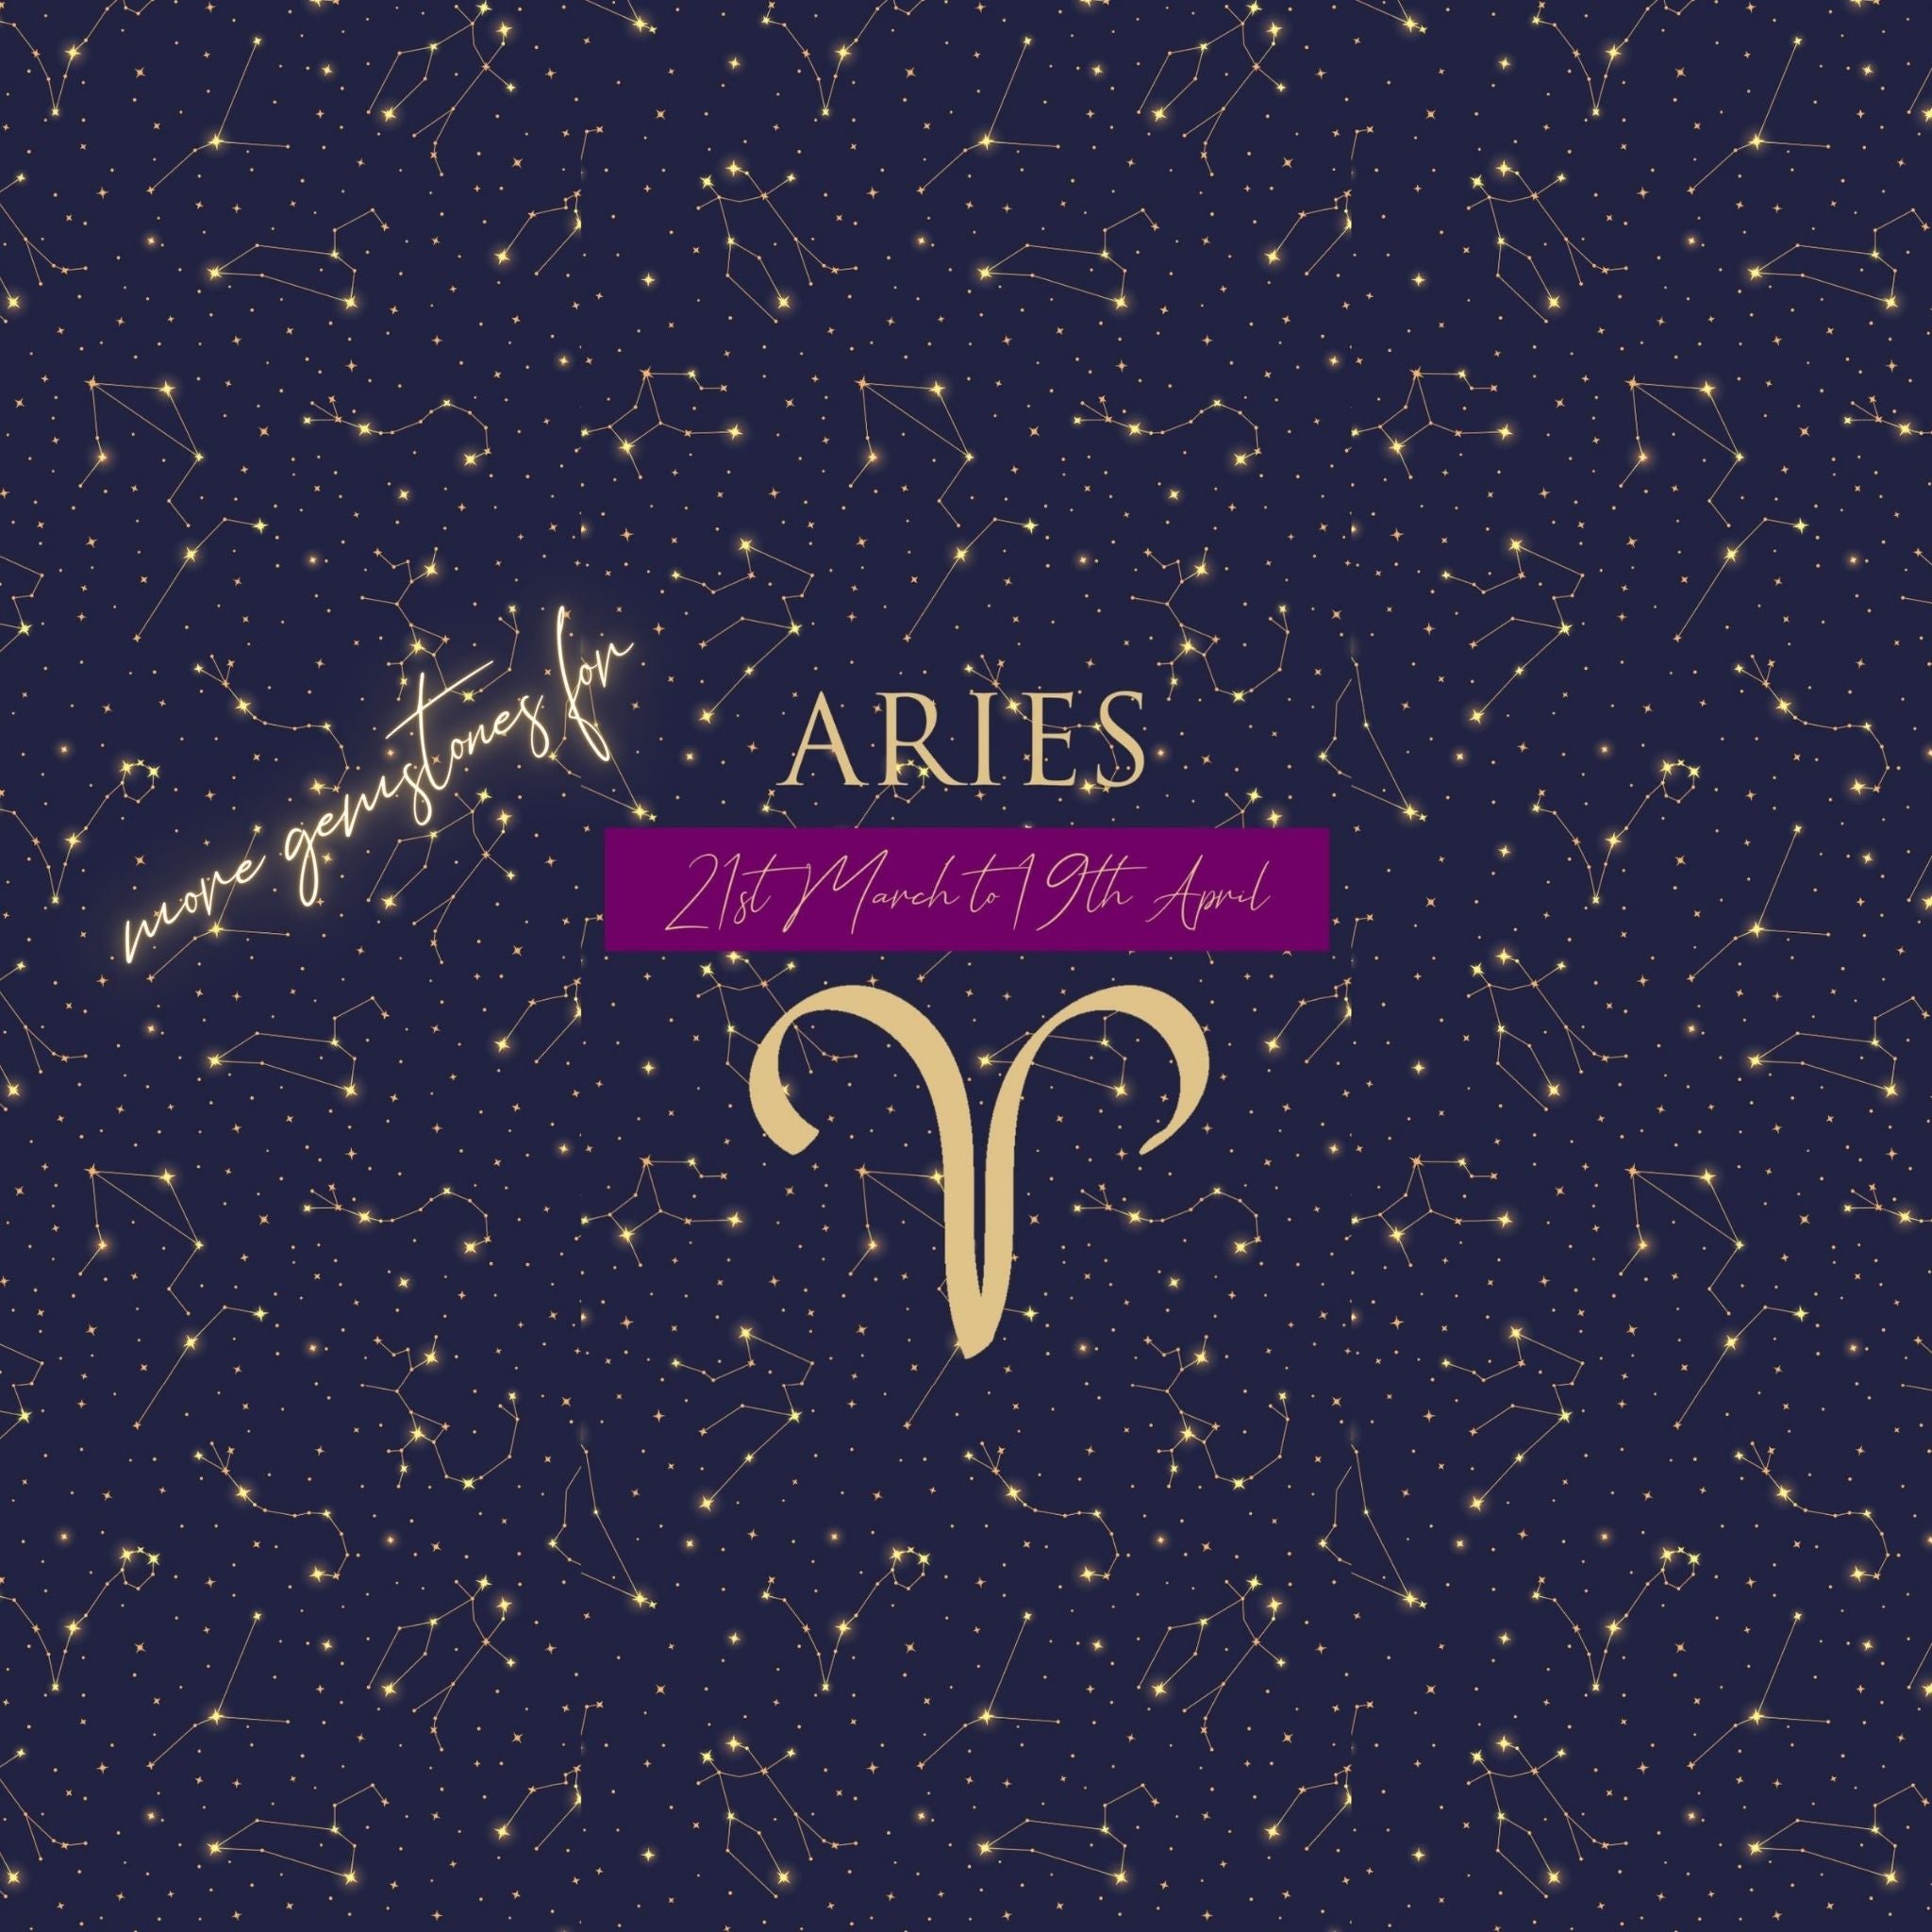 aries zodiac sign from march 21 to april 19